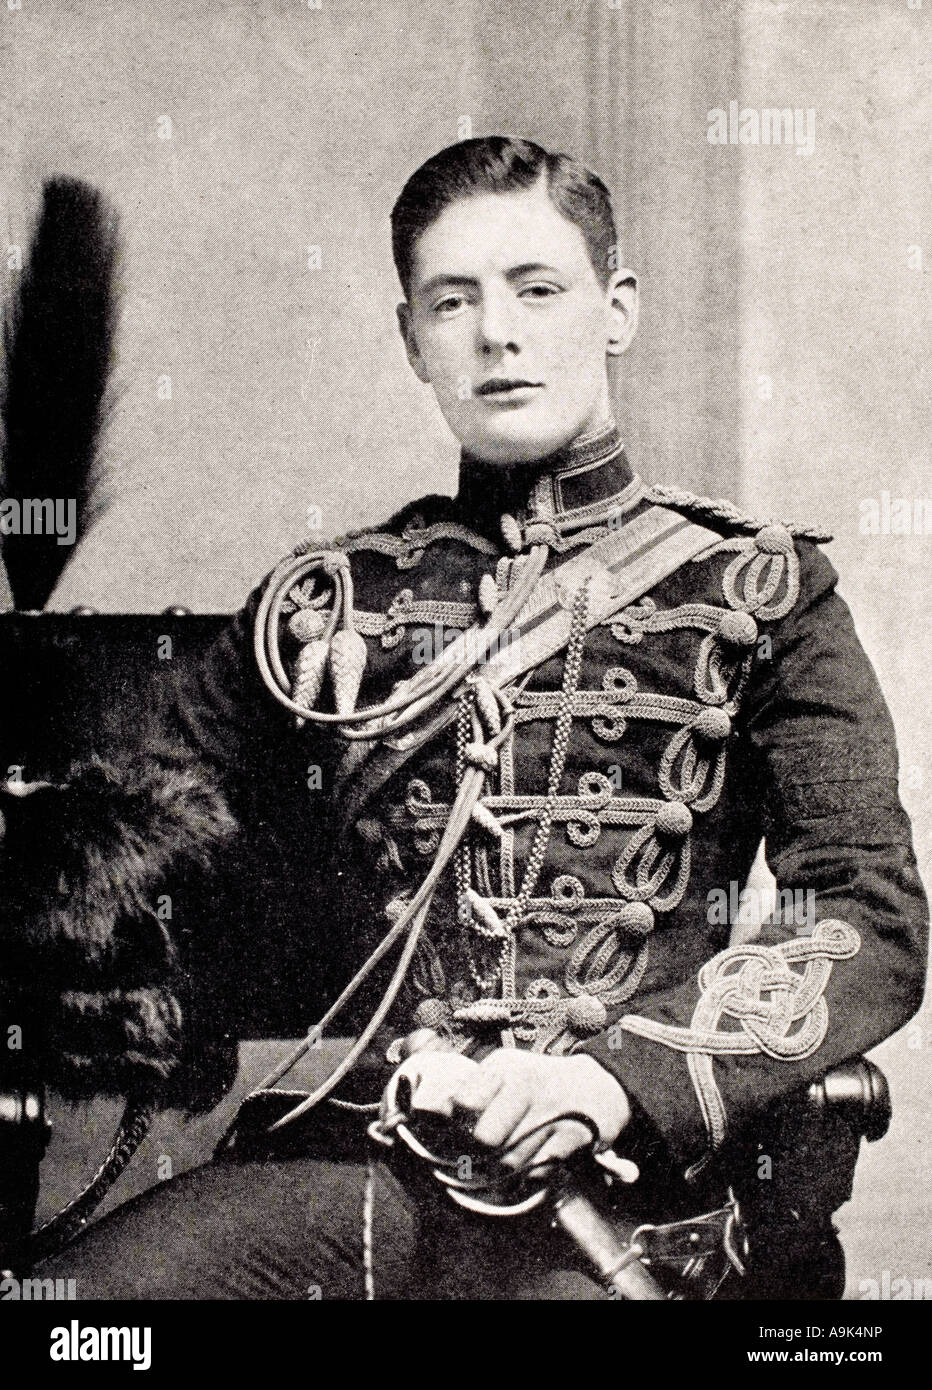 Winston S Churchill,  1874 to 1965. Seen here whilst serving as second Lieutenant in the 4th Queen's Own Hussars. Future Prime Minister. Stock Photo